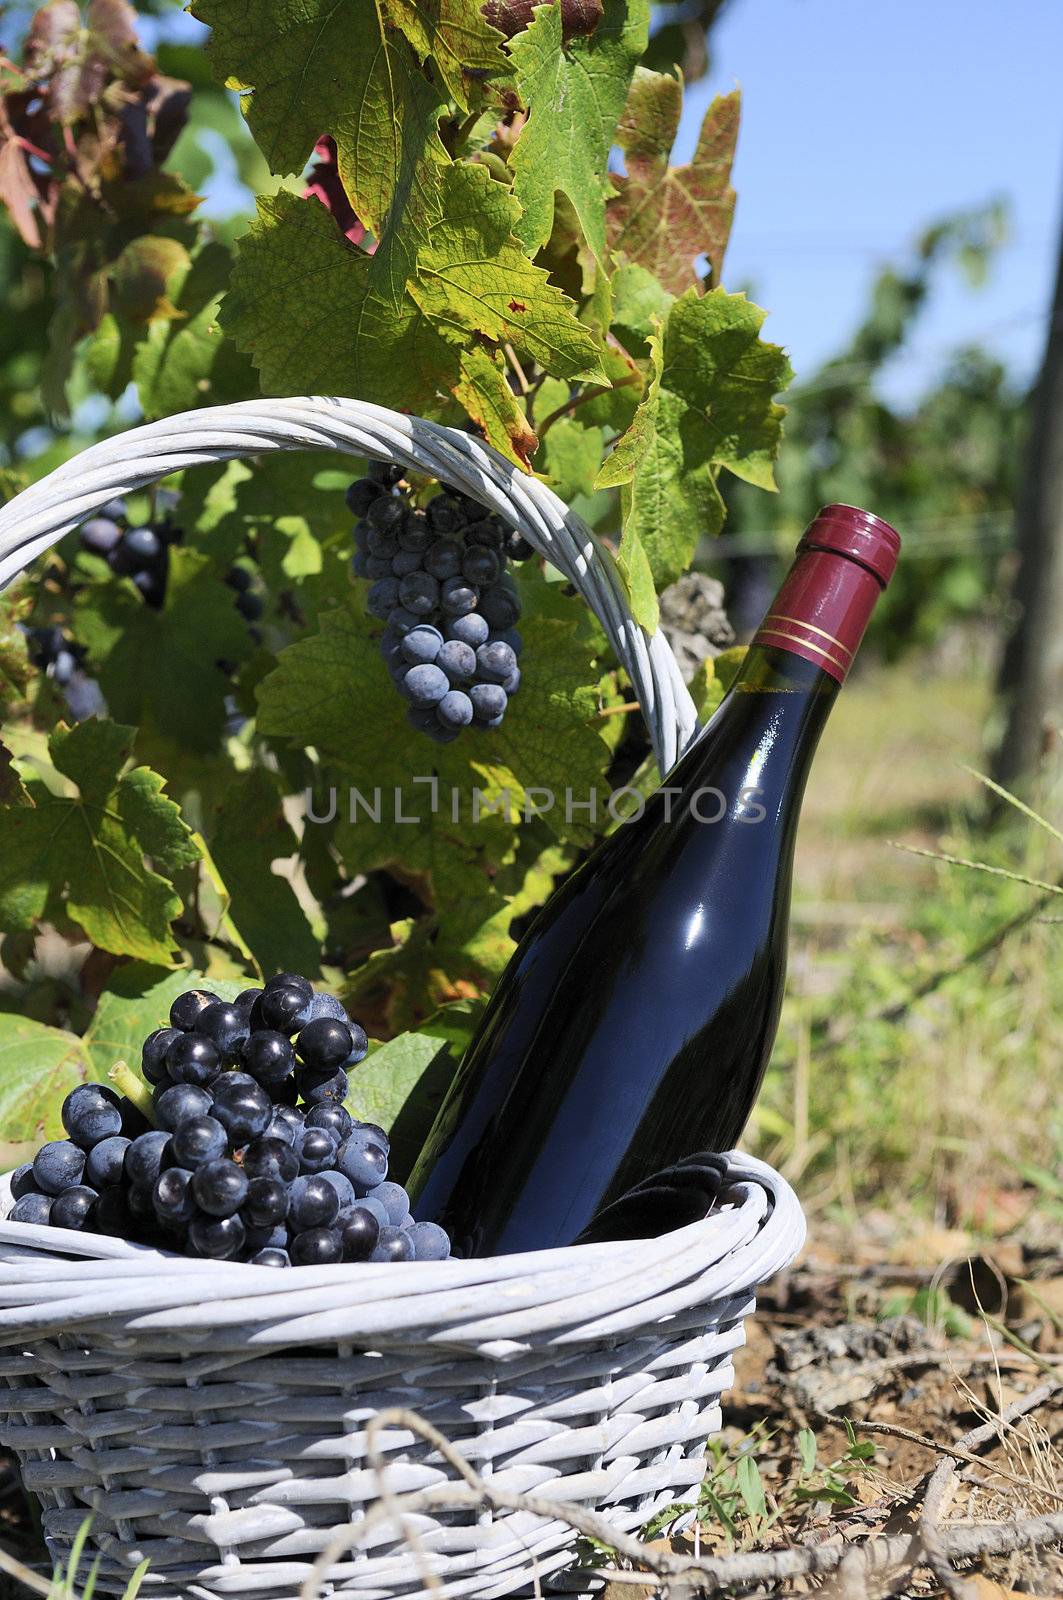 Bottle of red wine in a basket of reasons at the foot of a vine